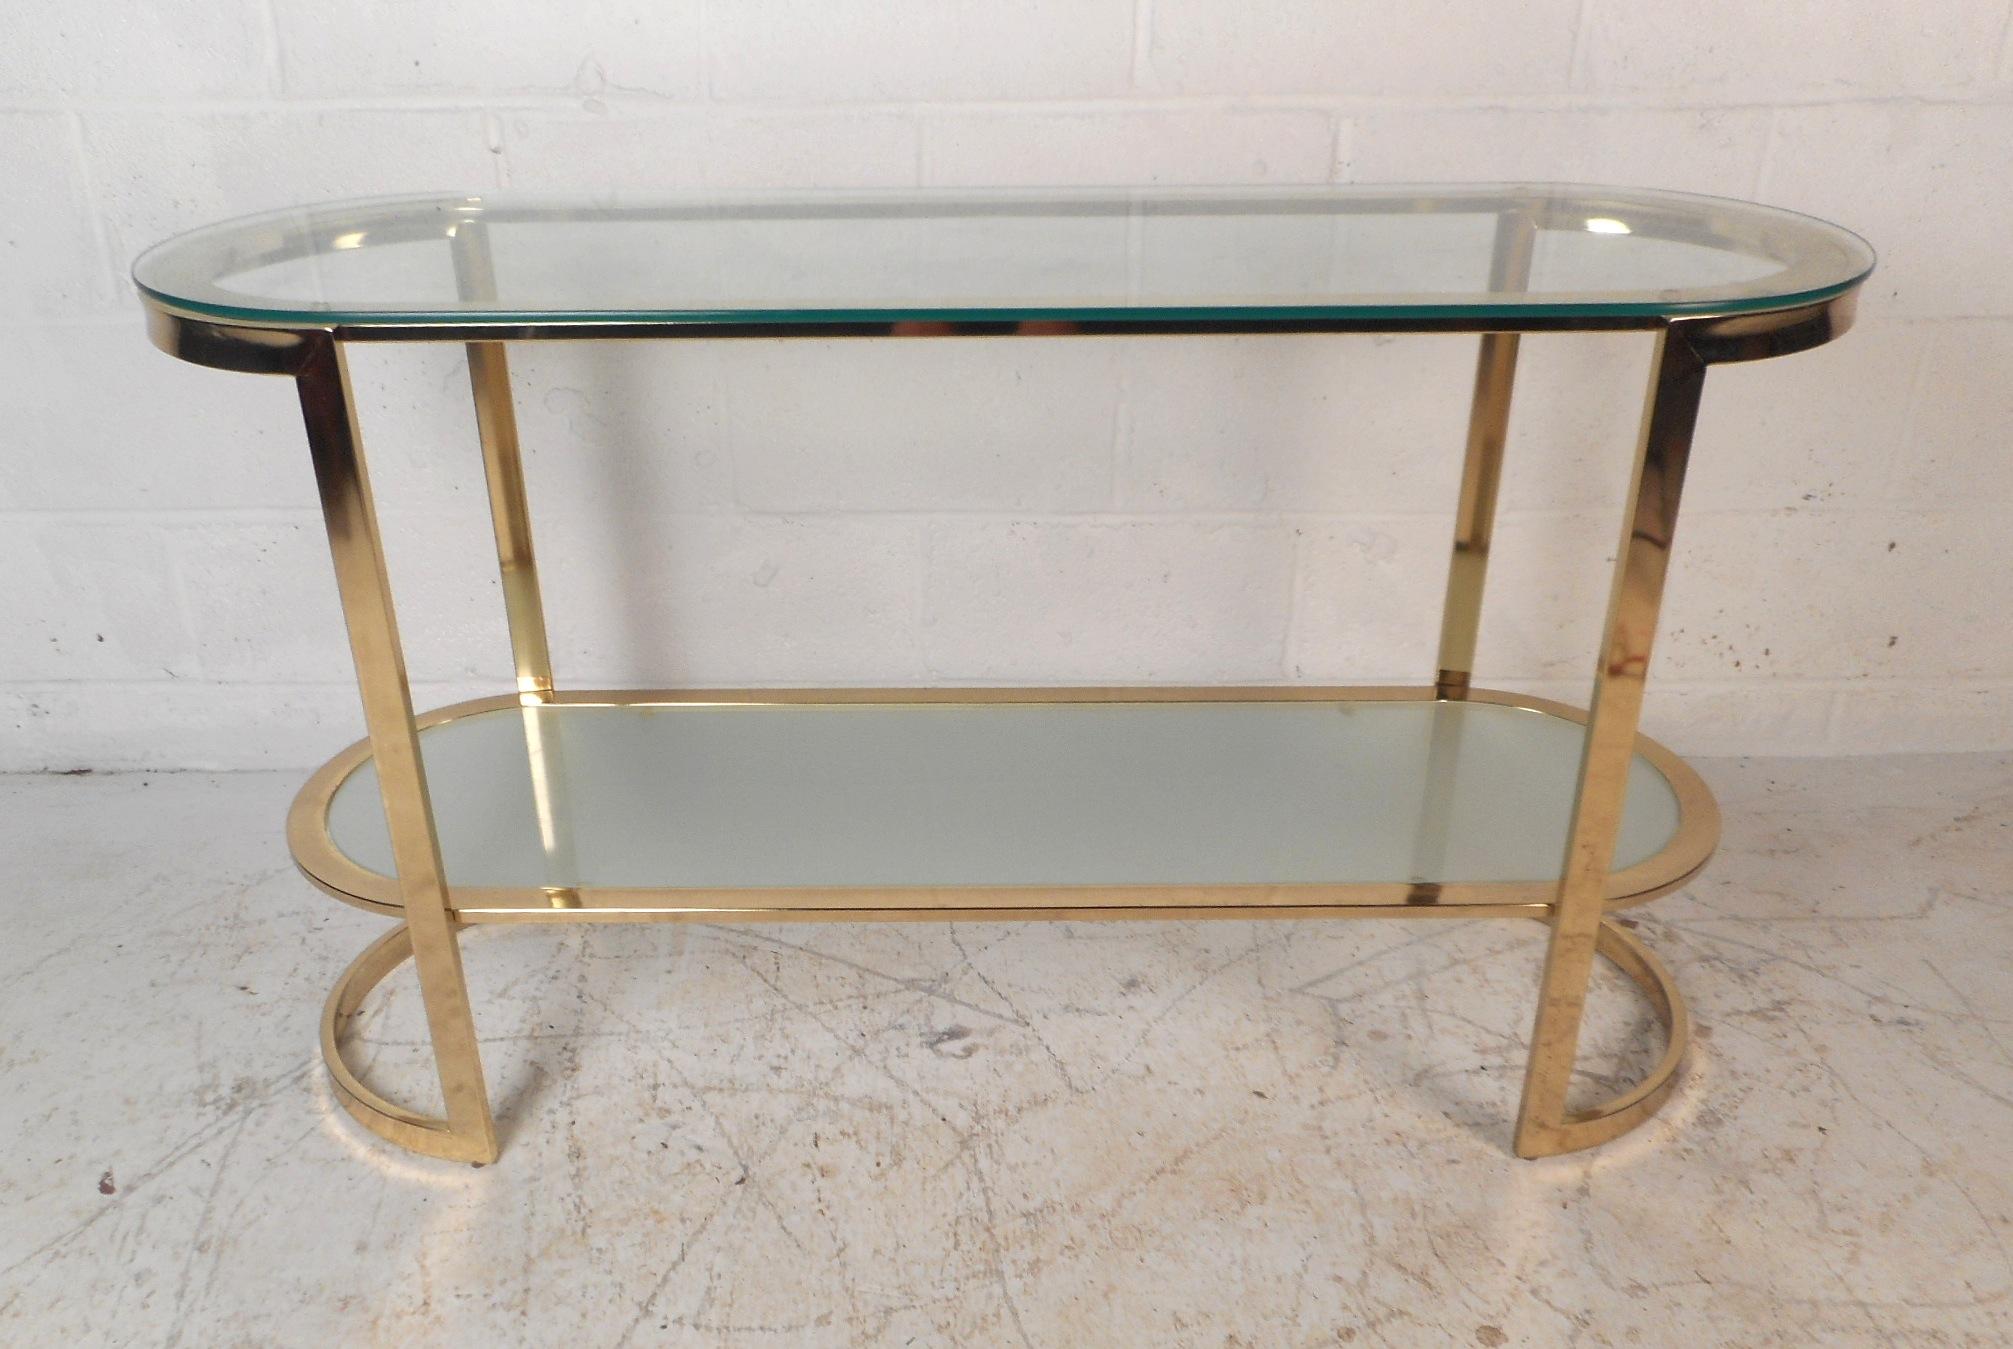 This beautiful vintage modern coffee table features a unique oval shape with two tiers of thick glass shelves. A stylish design with a flat bar brass frame and a lower frosted glass tier adding to the allure. This stylish piece looks great behind